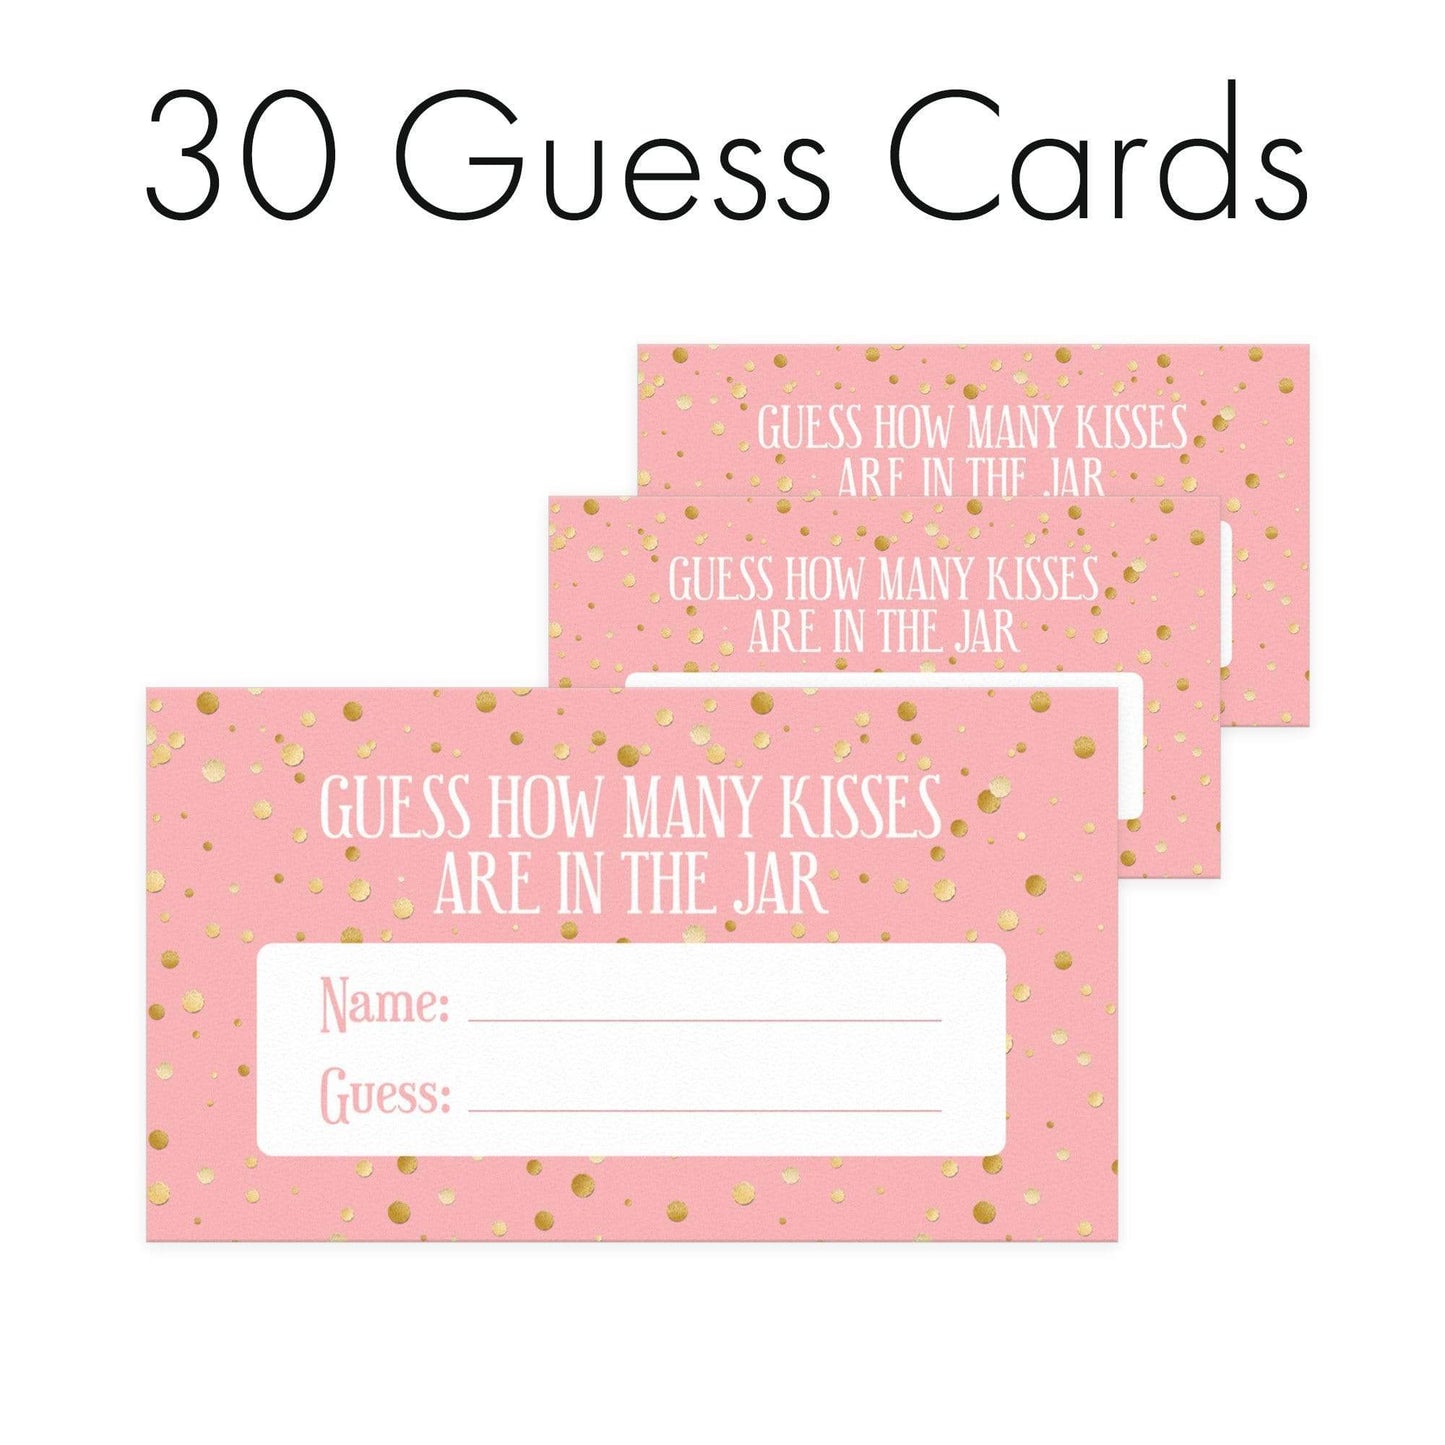 Extra Guess Cards ONLY (No Sign) Pink and Gold How Many Kisses Baby Shower Game